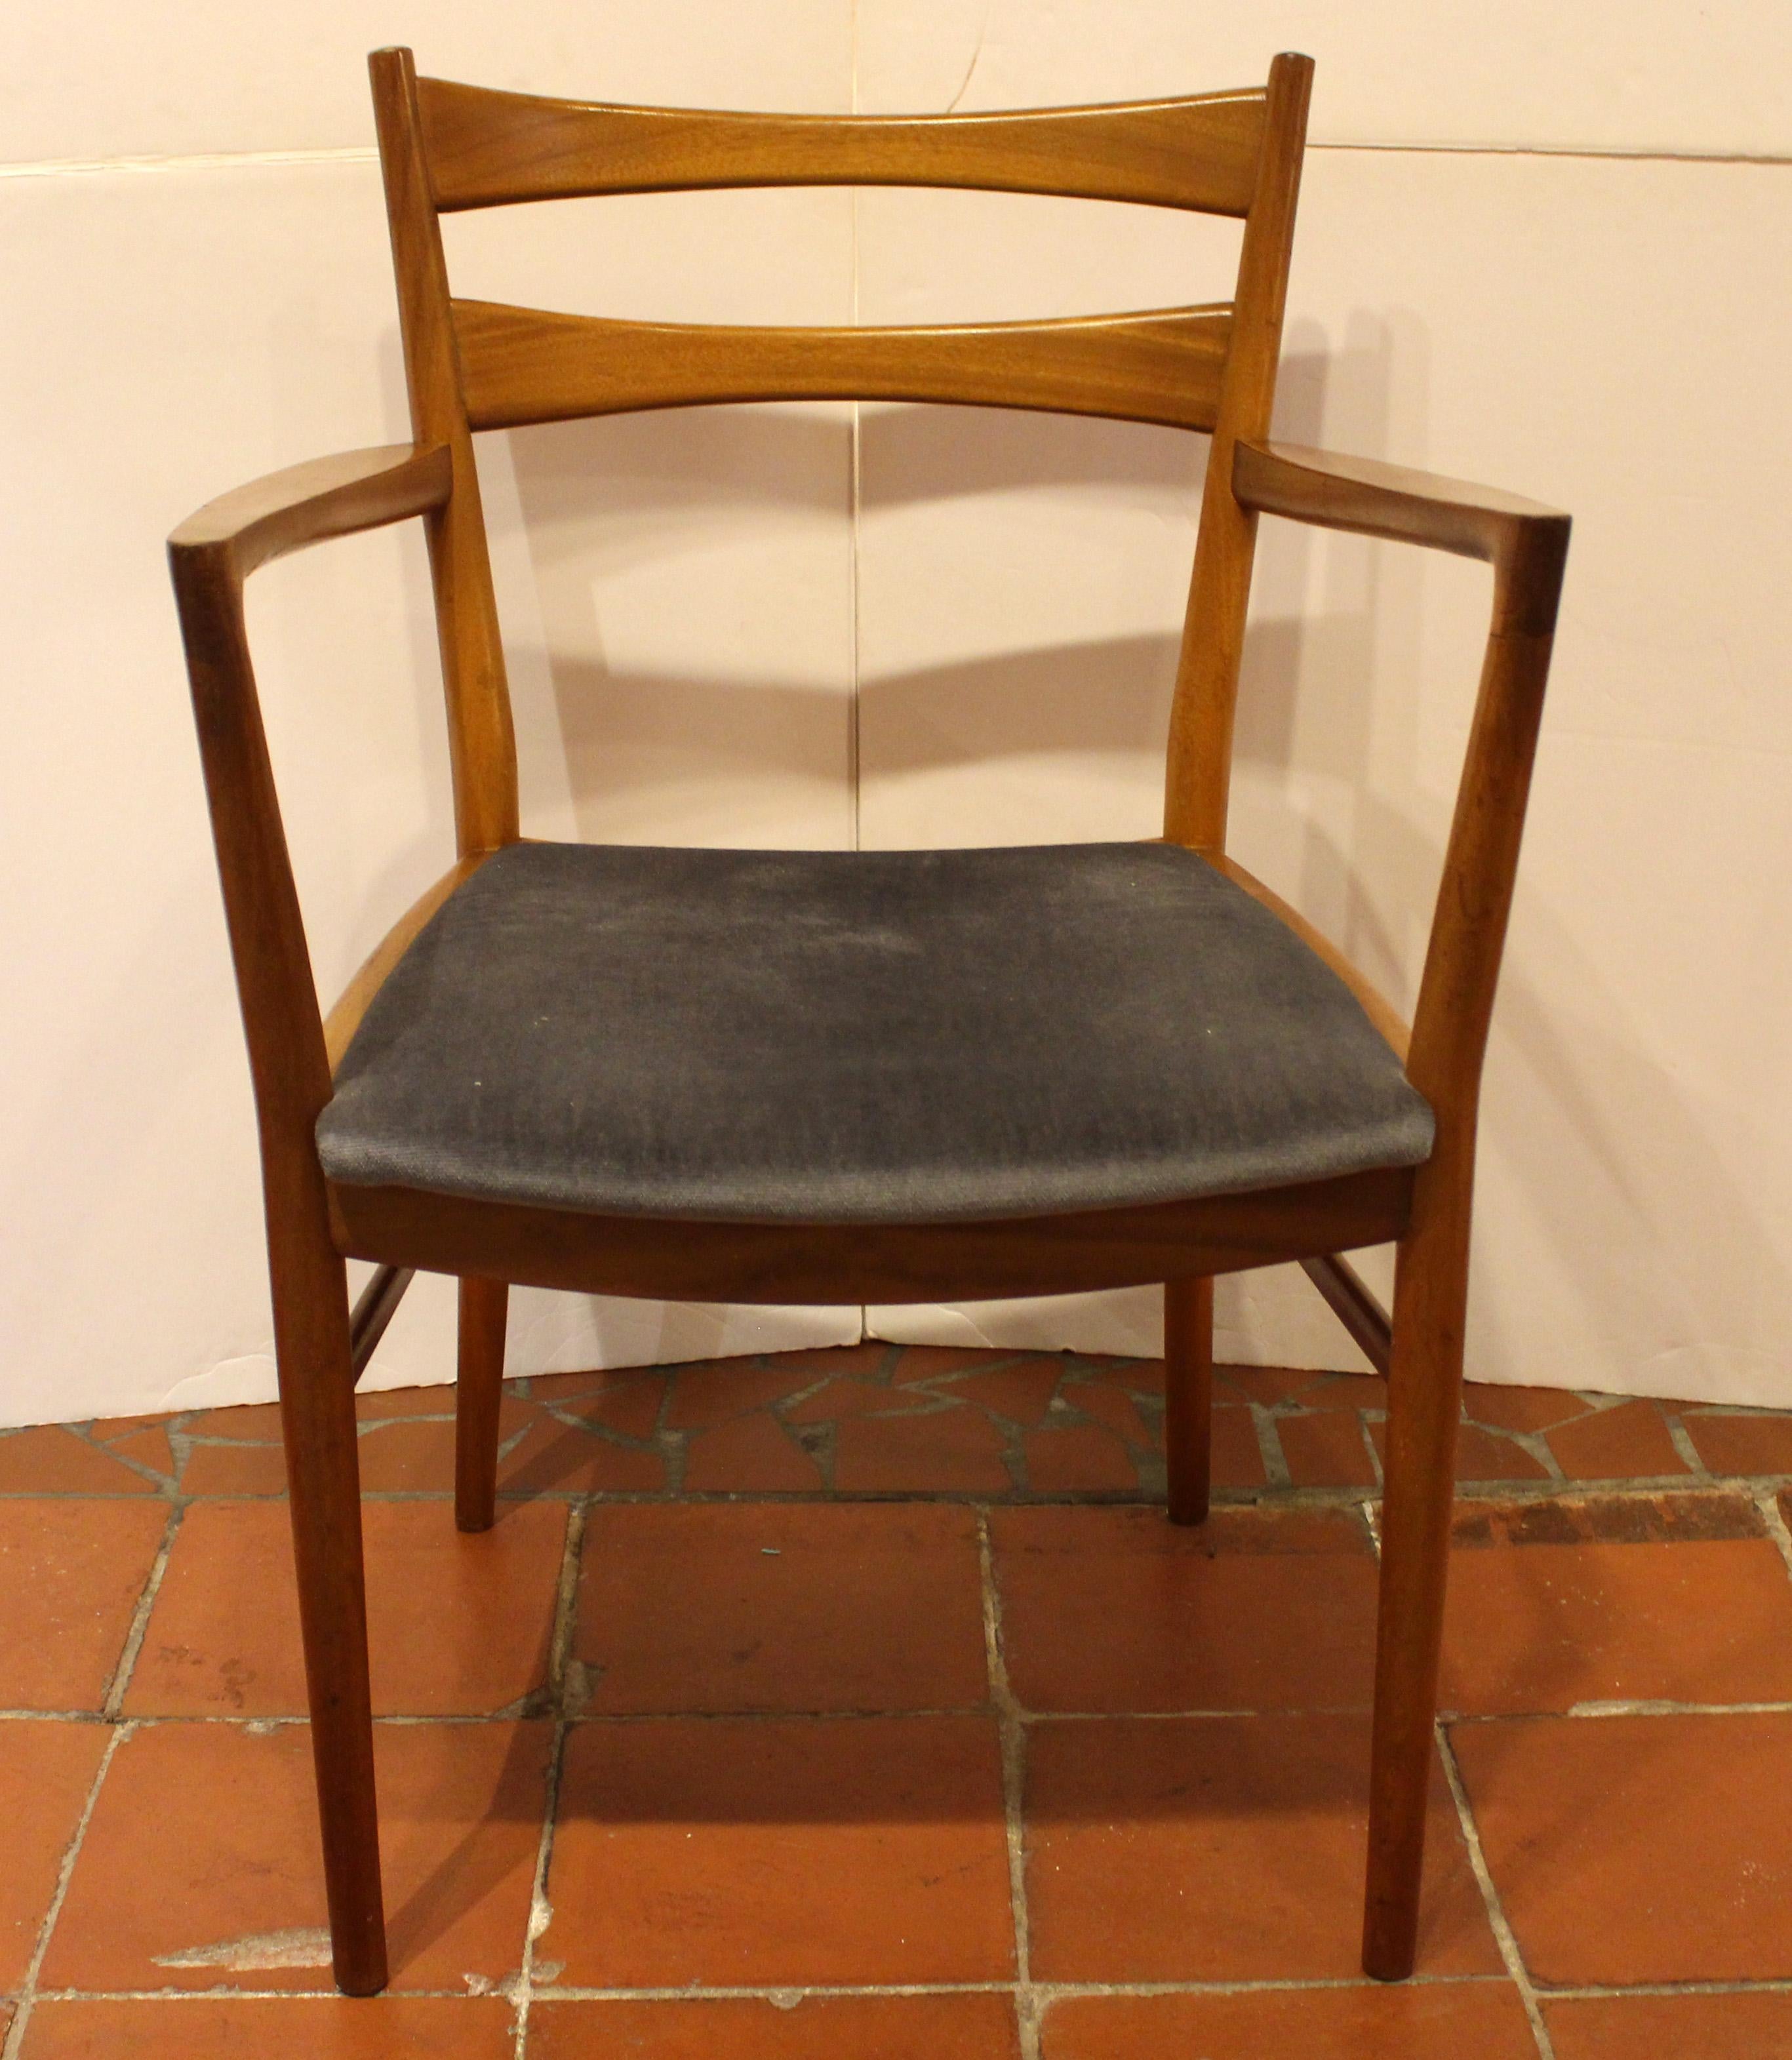 Circa 1960s set of 10 Mid-Century Modern dining chairs by Beithcraft Ltd. of Scotland. Two arms & 8 sides. Shaped double backsplats. Turned tapered legs with turned side rails. Great kick back to the long legs & back supports and sweep to the